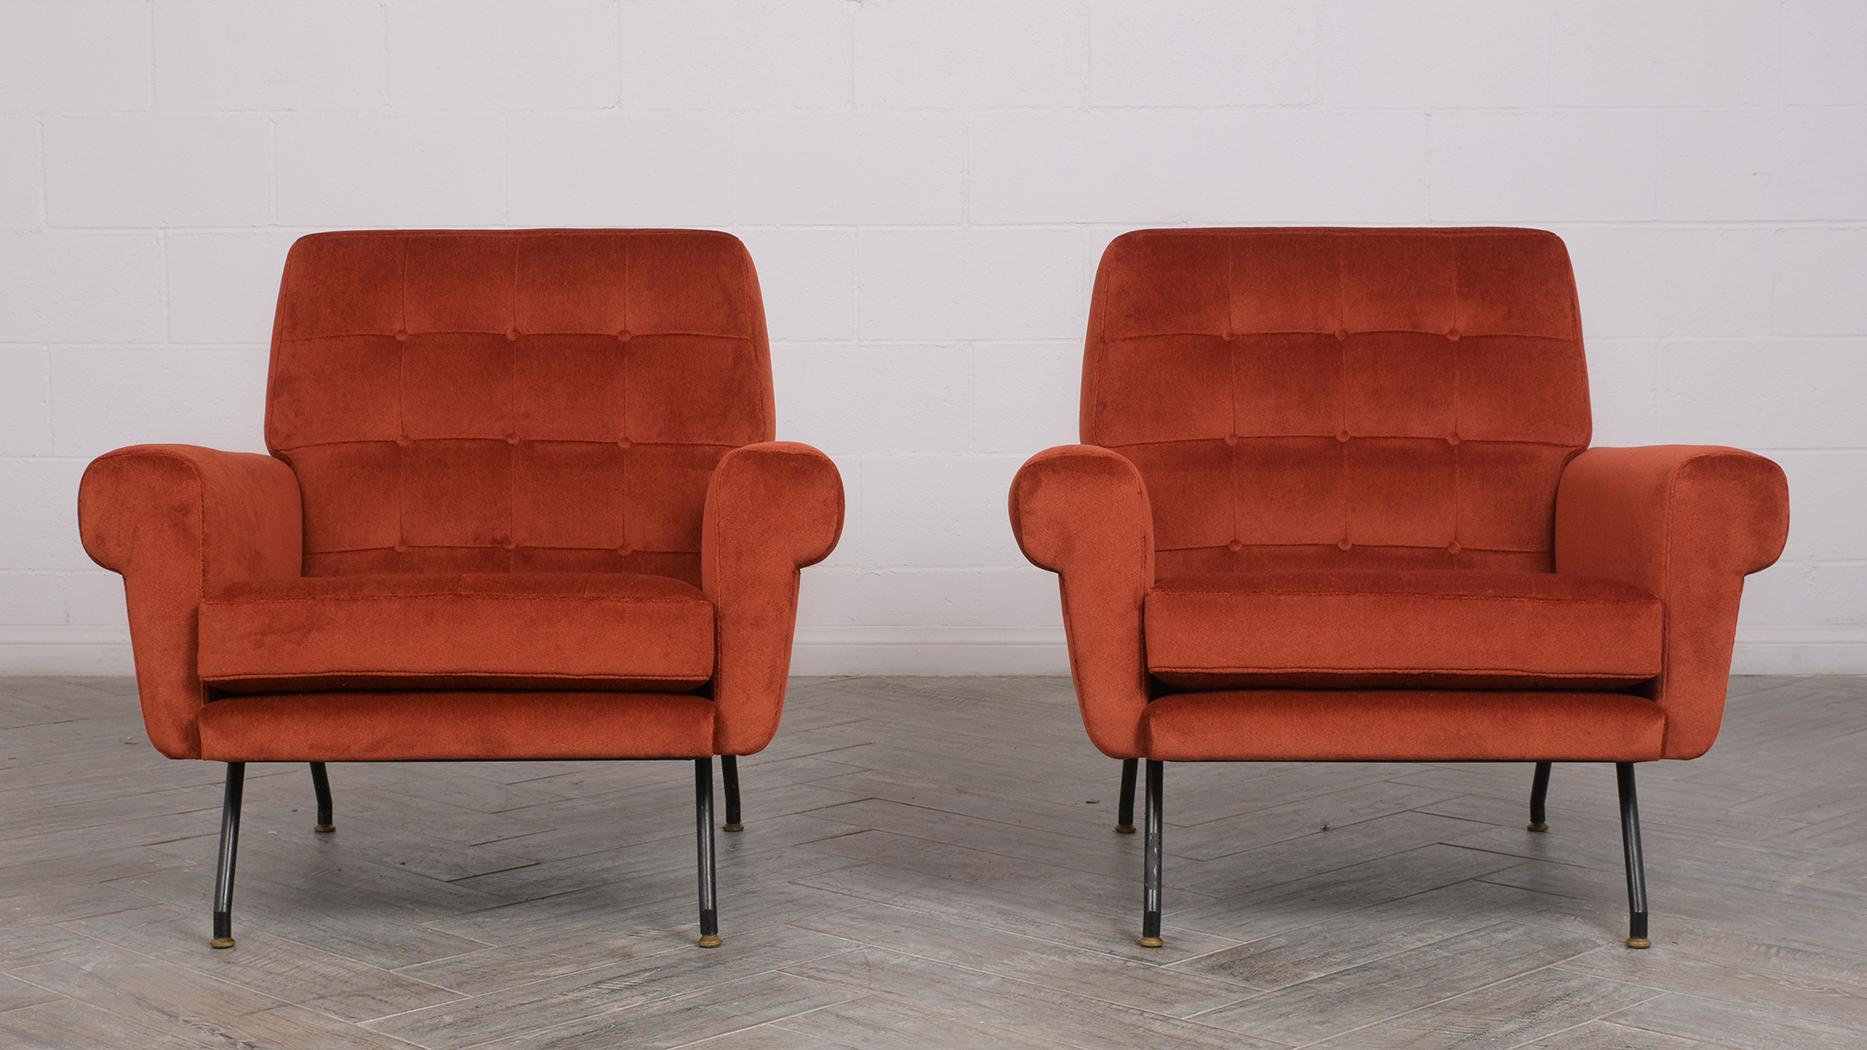 This pair of 1960s Modern style lounge chairs have been completely restored. These comfortable chairs have been professionally reupholstered in a orange red colored mohair fabric with tufted detail. The legs are made from wrought iron and finished